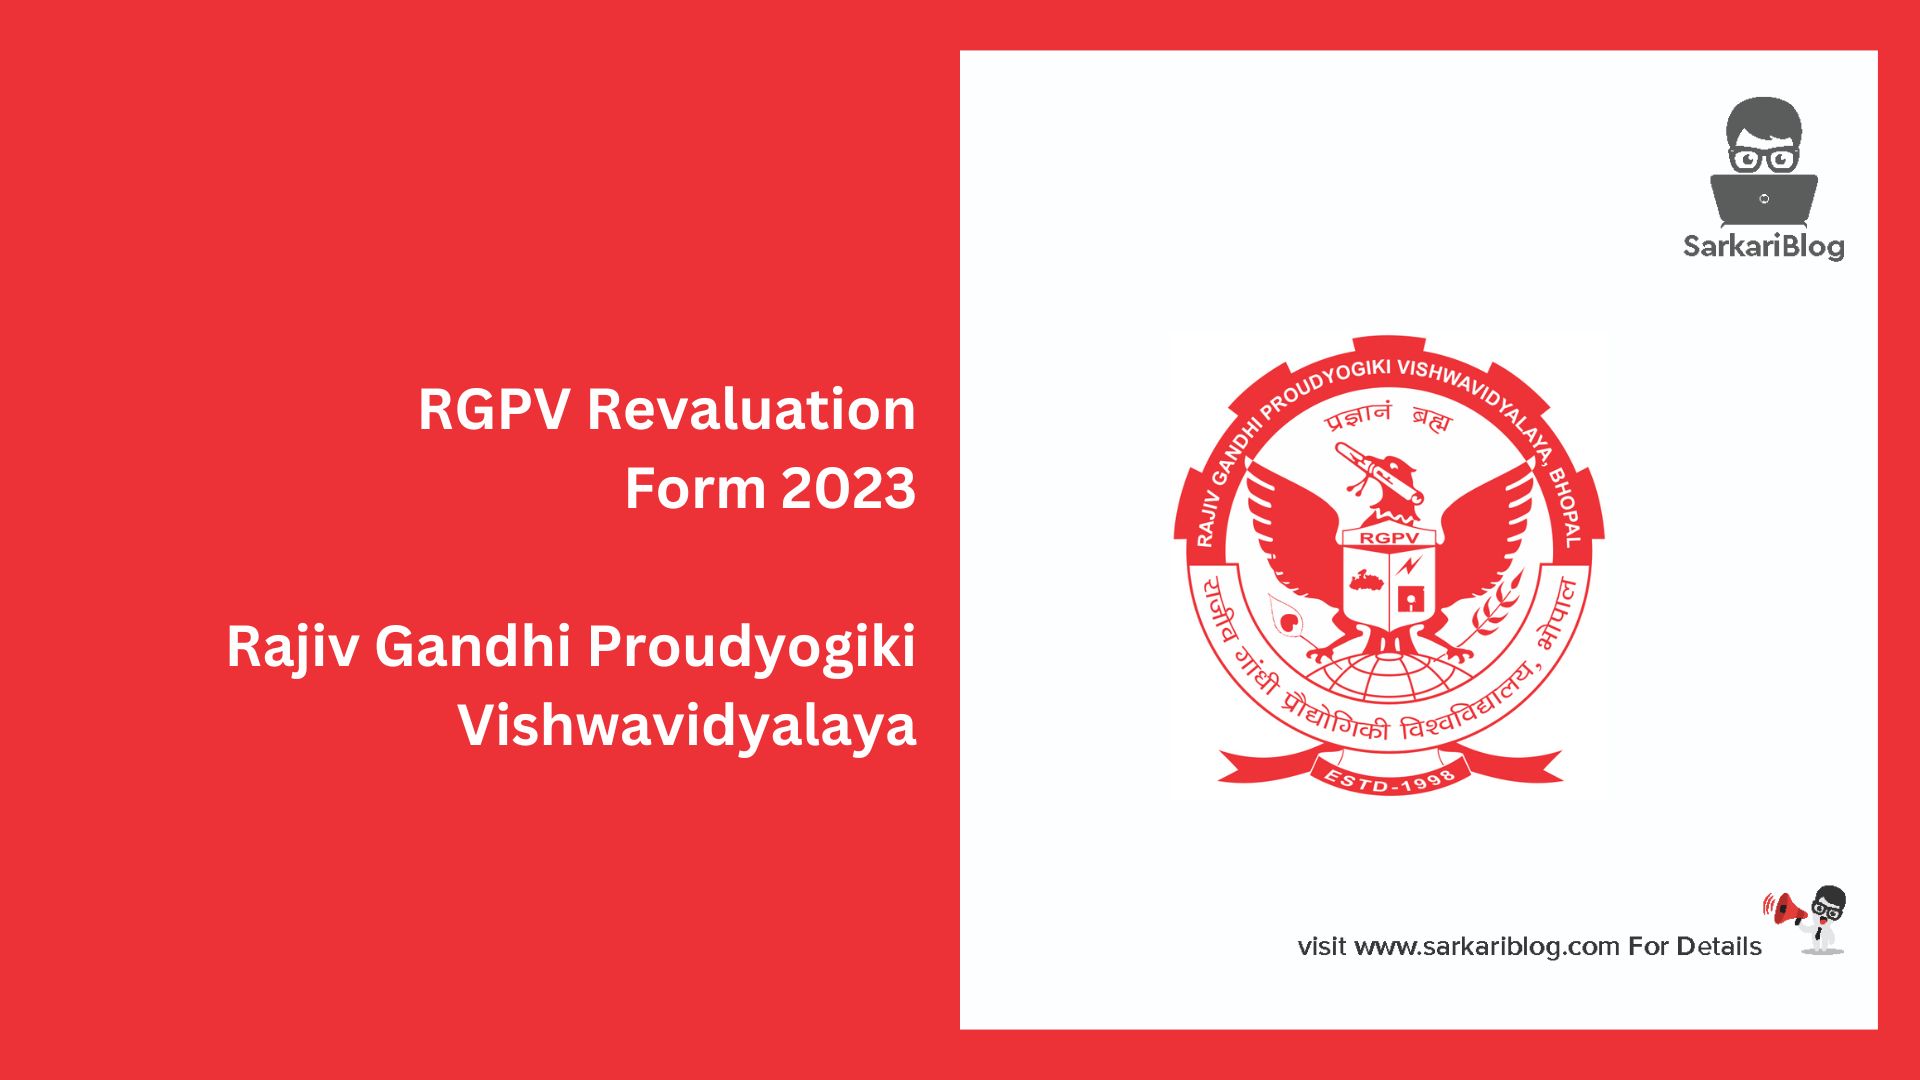 RGPV Revaluation Form 2023